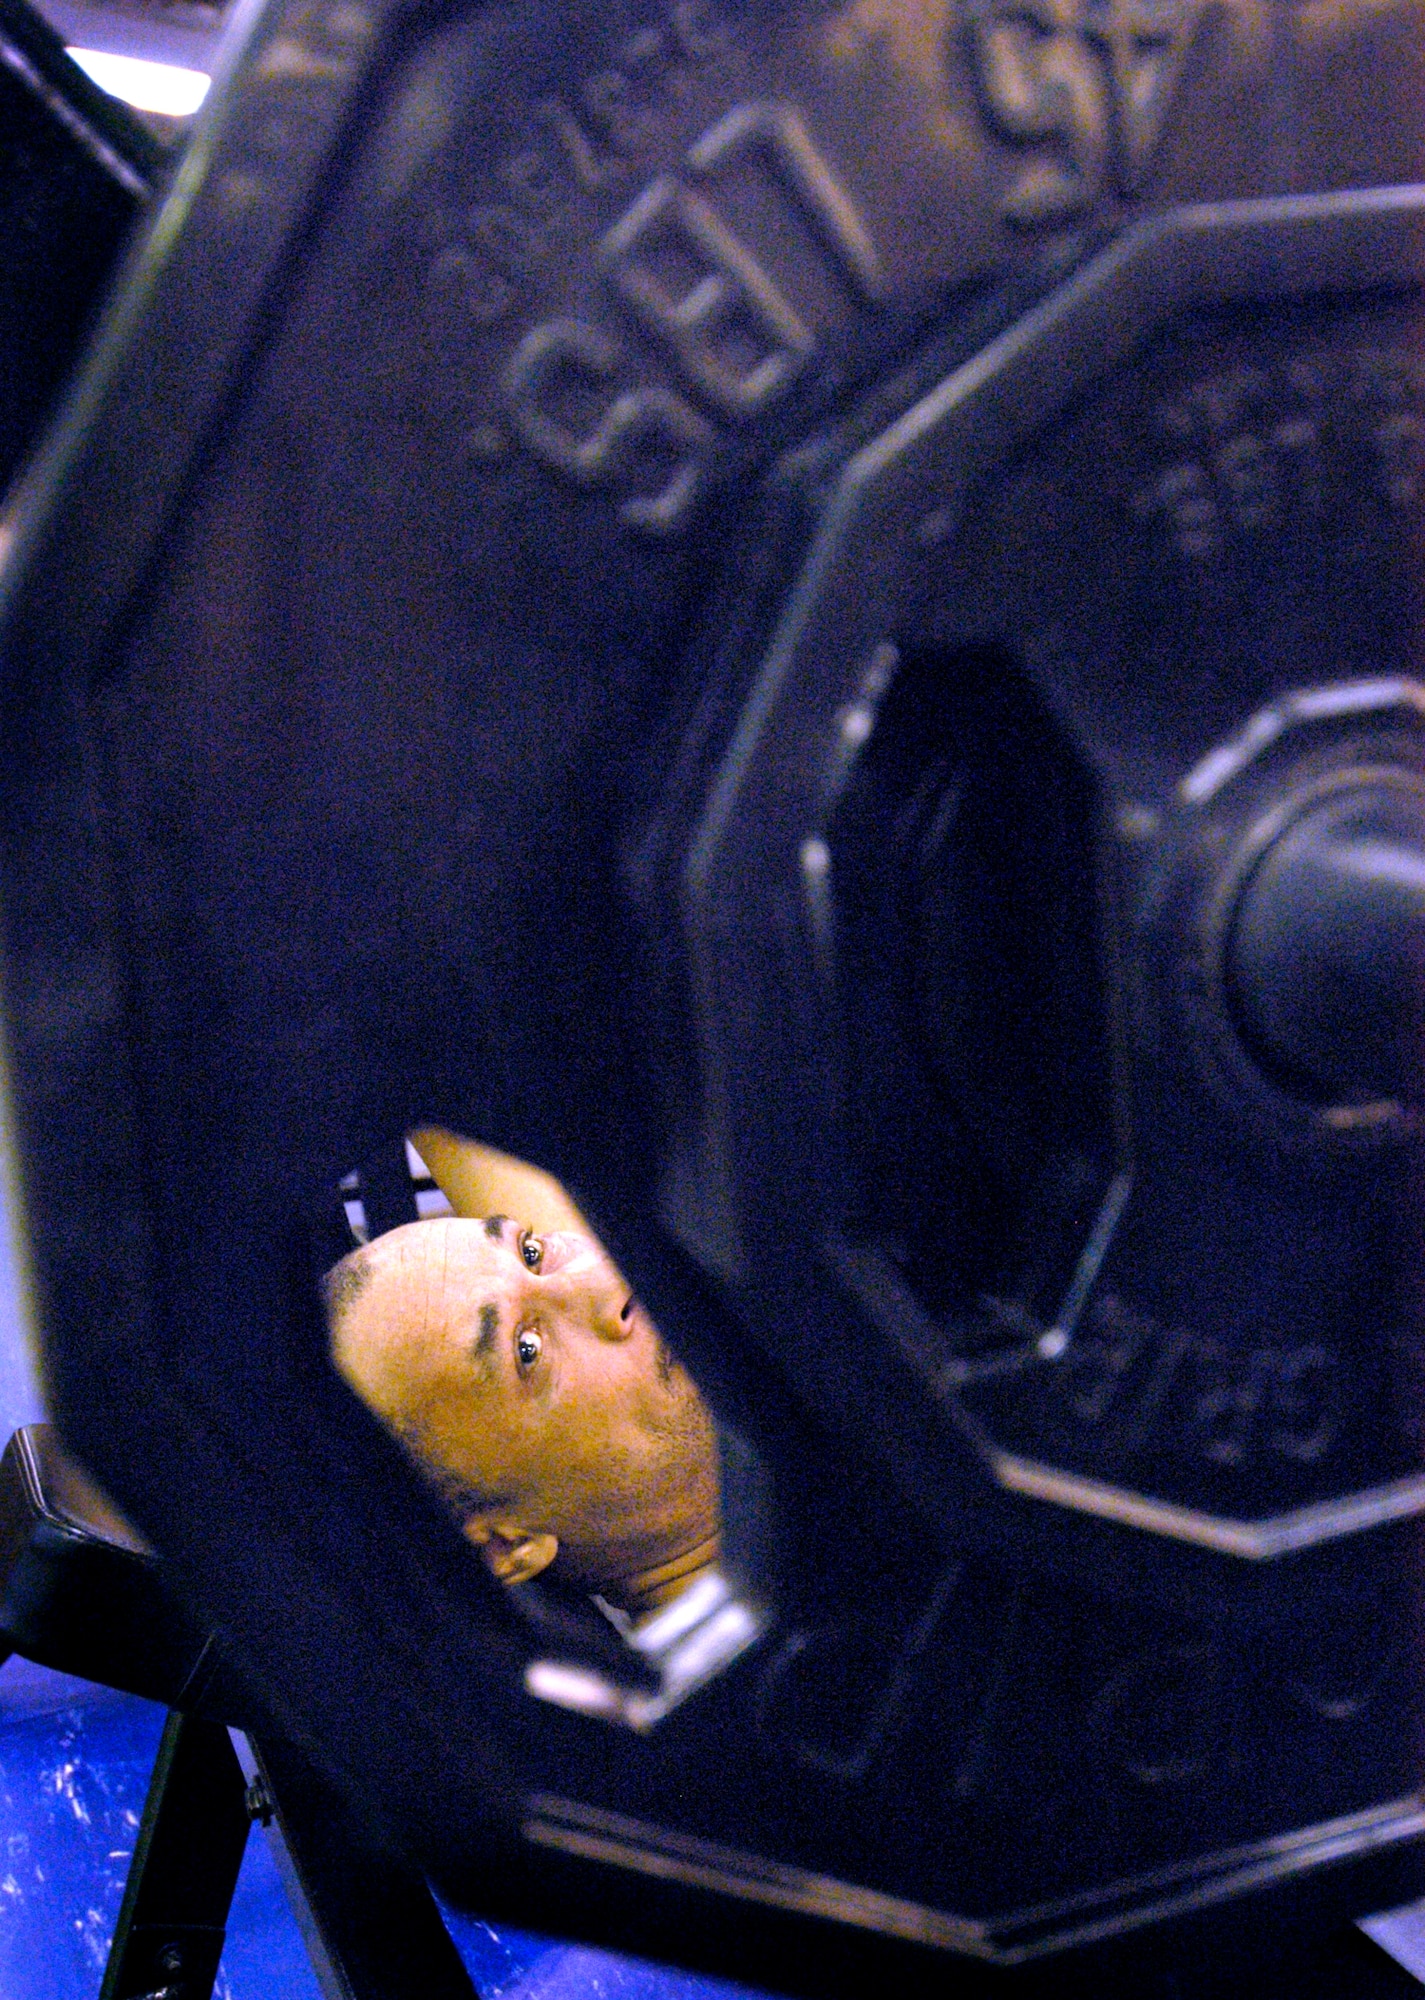 TINKER AIR FORCE BASE, Okla. - Michael Black checks his weights before hefting the bar in a daily workout that also improves his cardiovascular fitness. (Air Force photo by Margo Wright)

